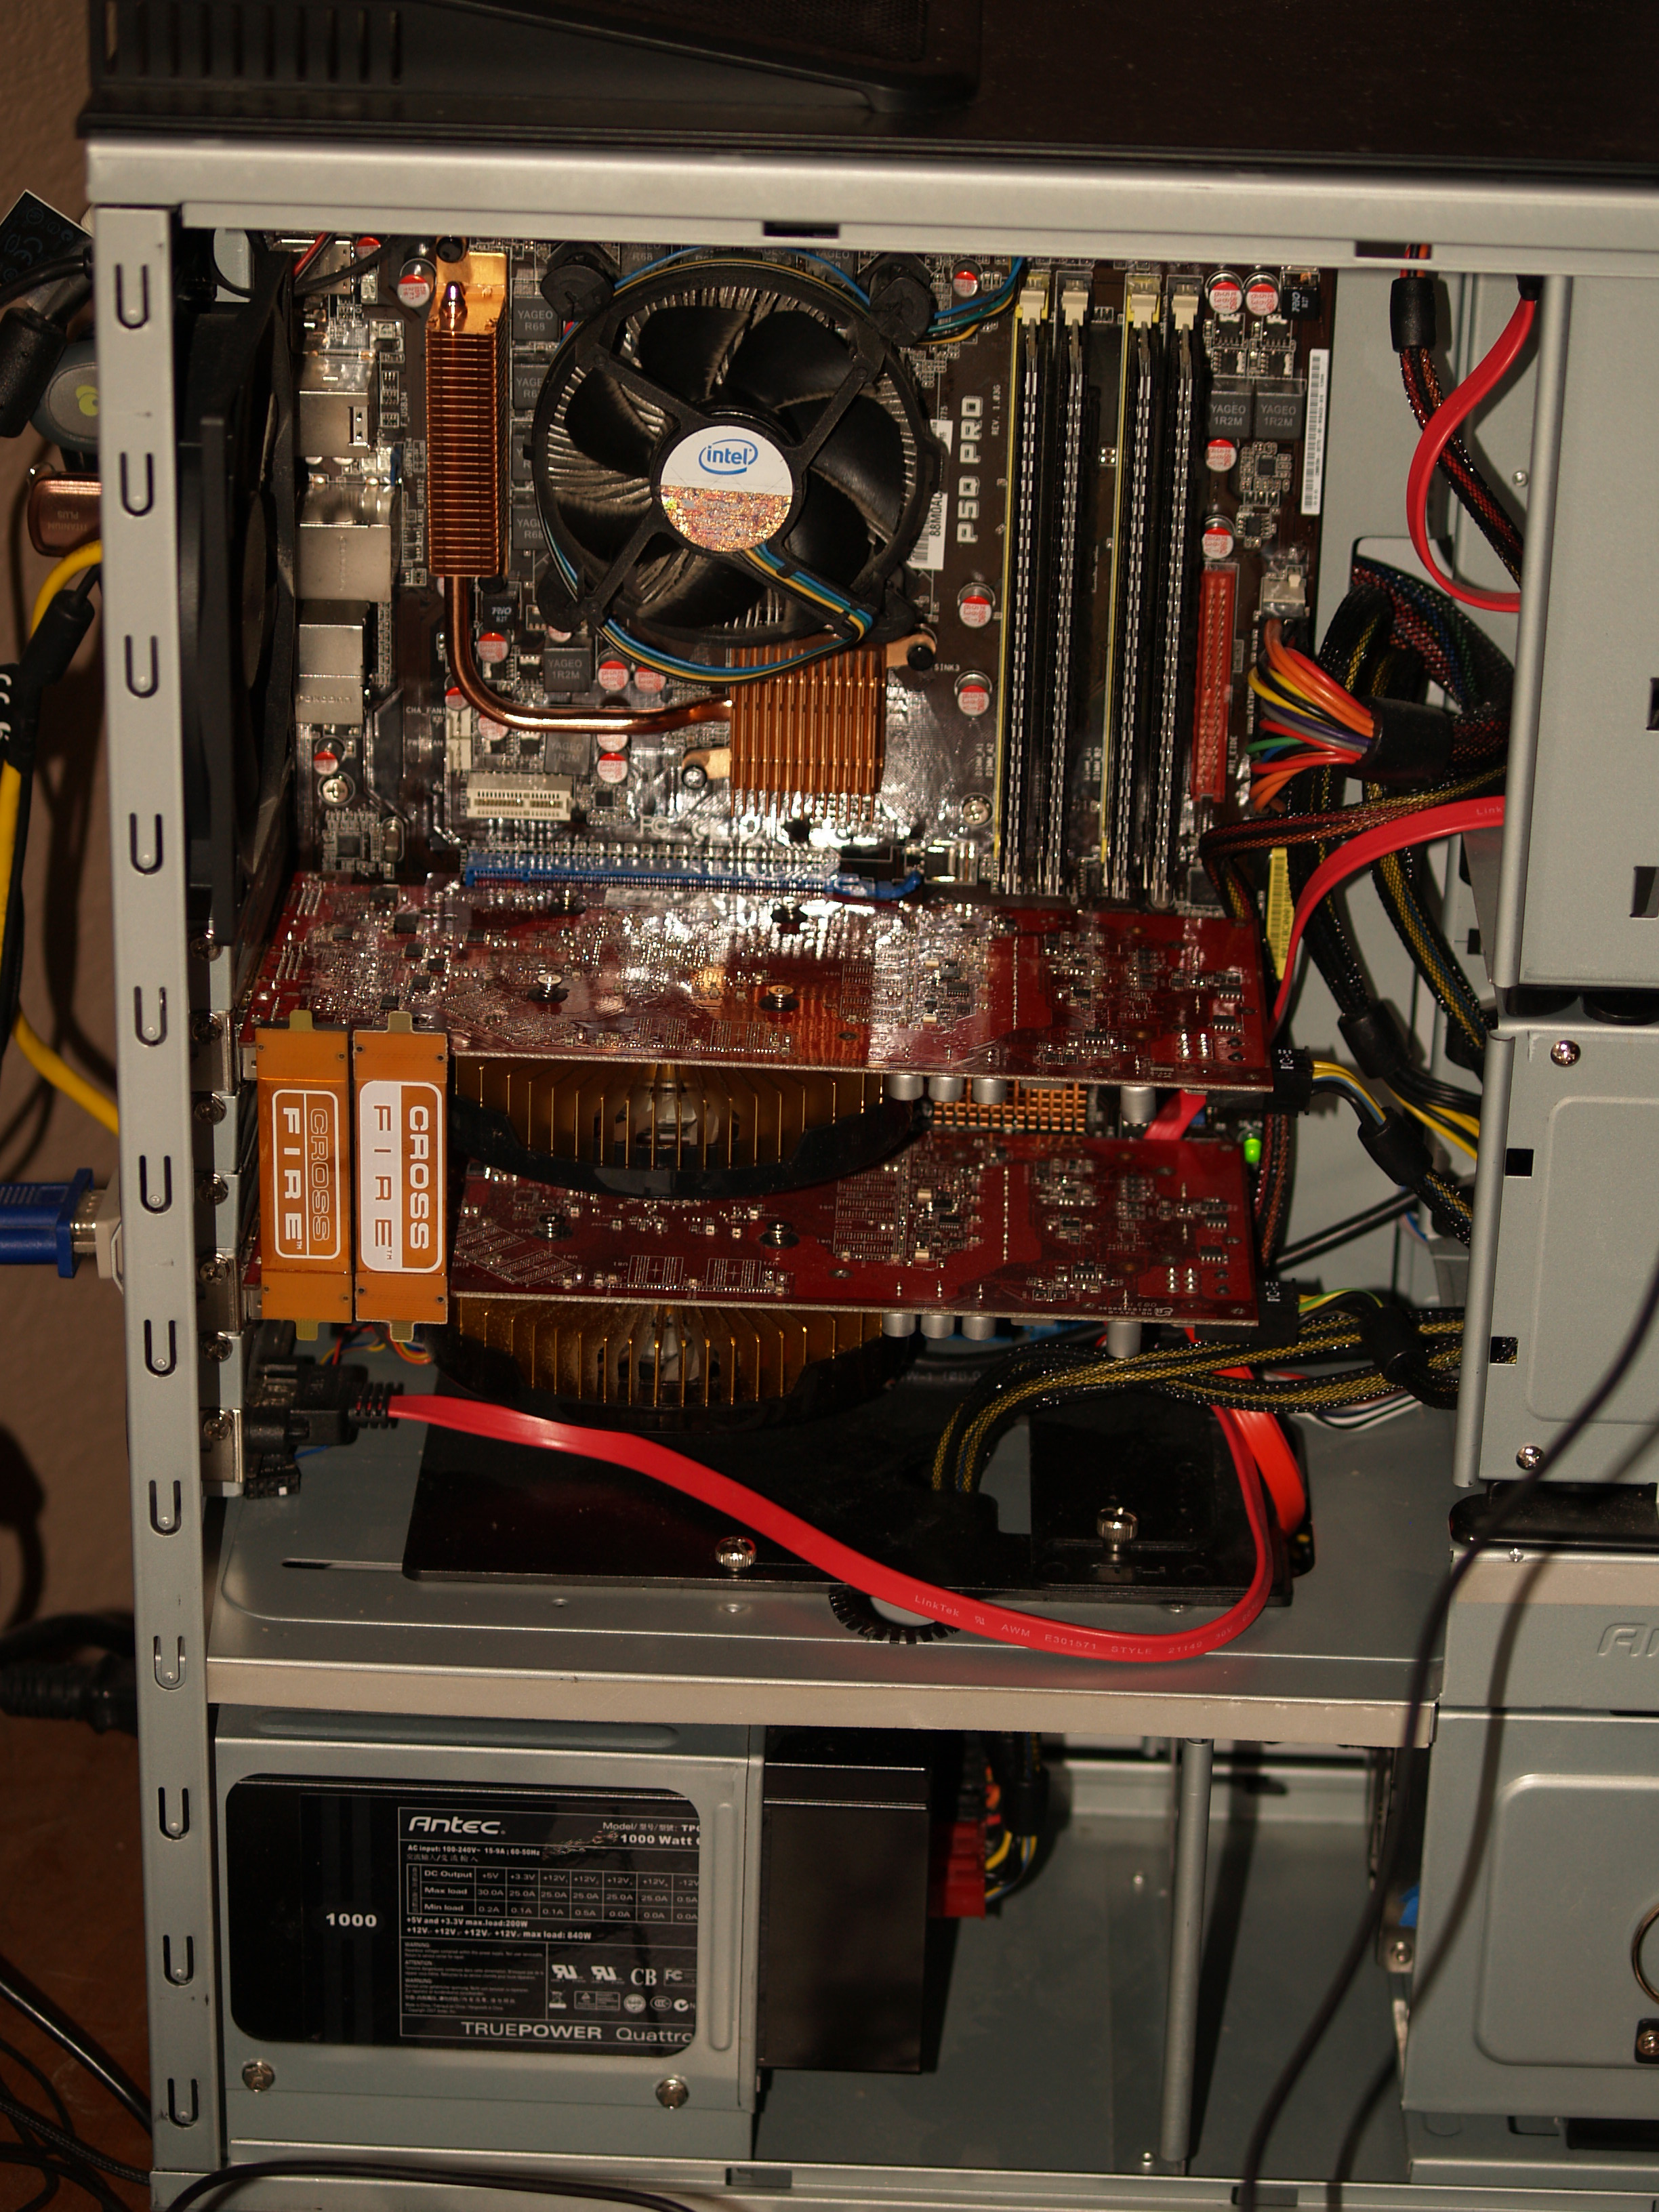 Computer_system_with_3%2C16Ghz_Core_2_Duo%2C_6GB_RAM_and_2x_Radeon_HD_4850_in_CrossFire.jpg